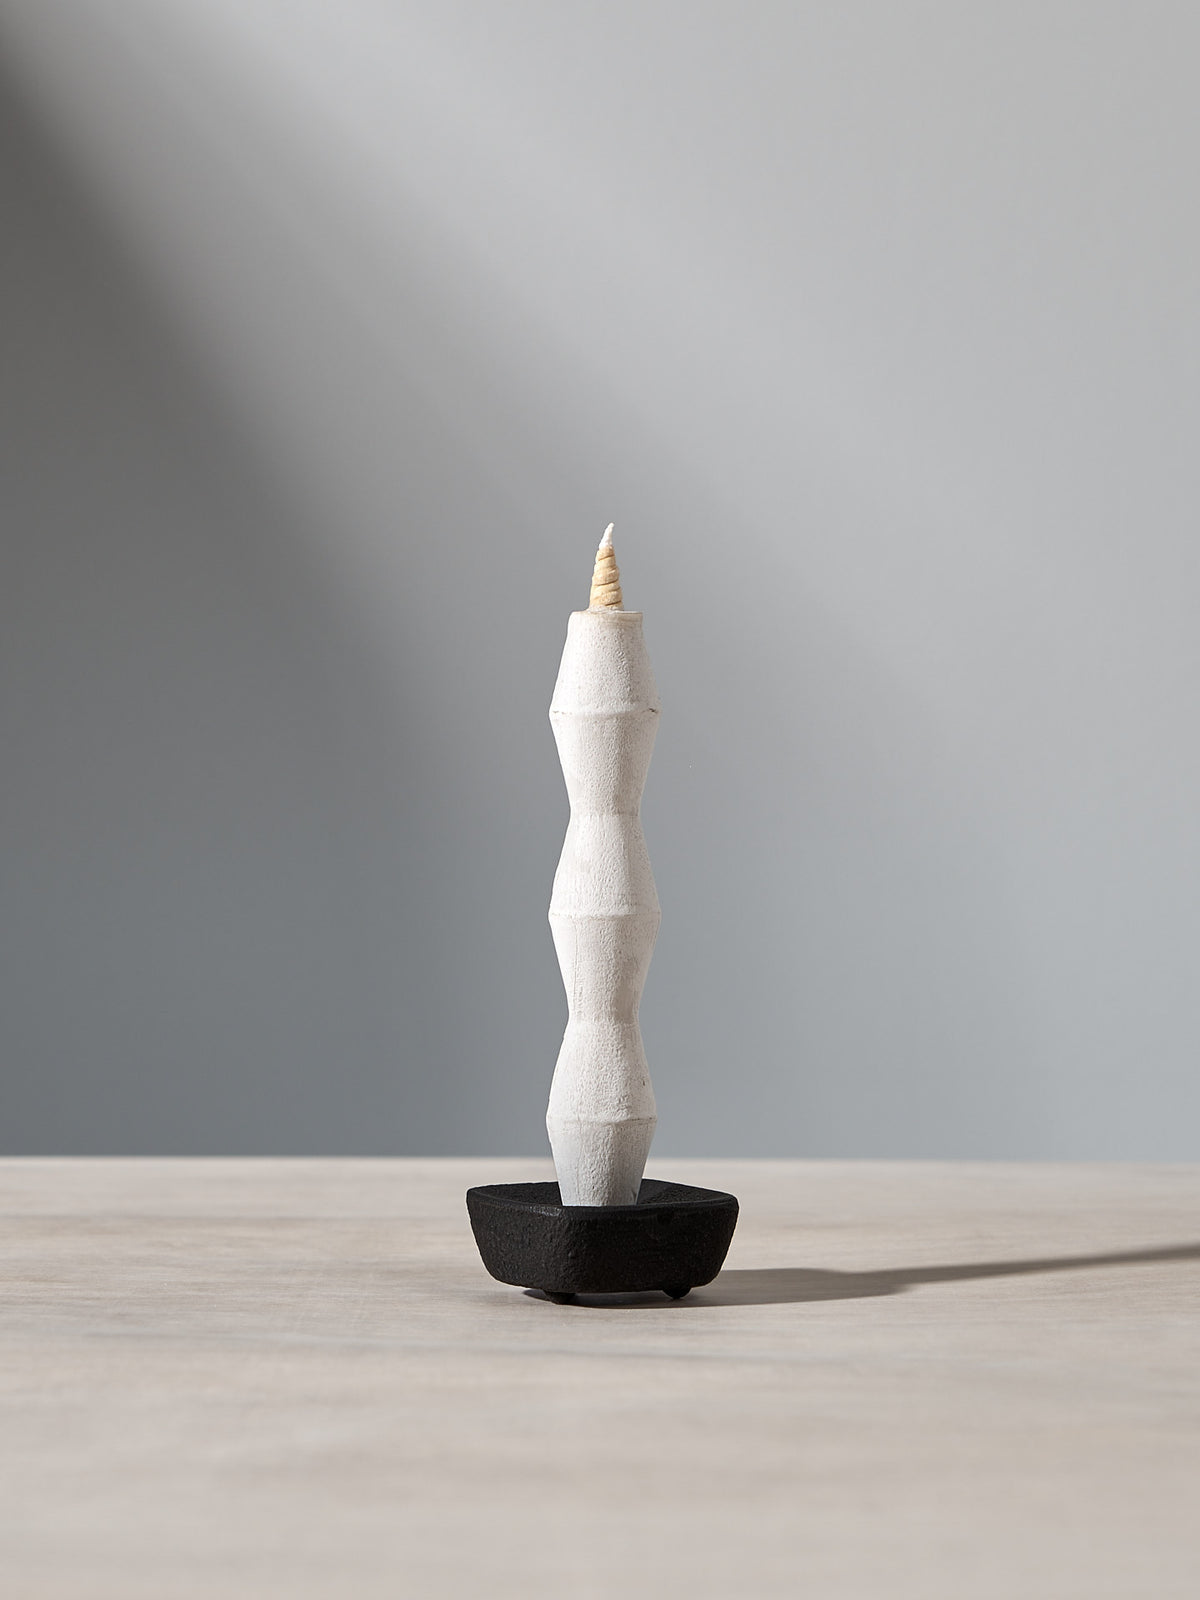 A NANAO – 5 Piece Mixed Box Set candle sitting on top of a wooden table from brand Takazawa.